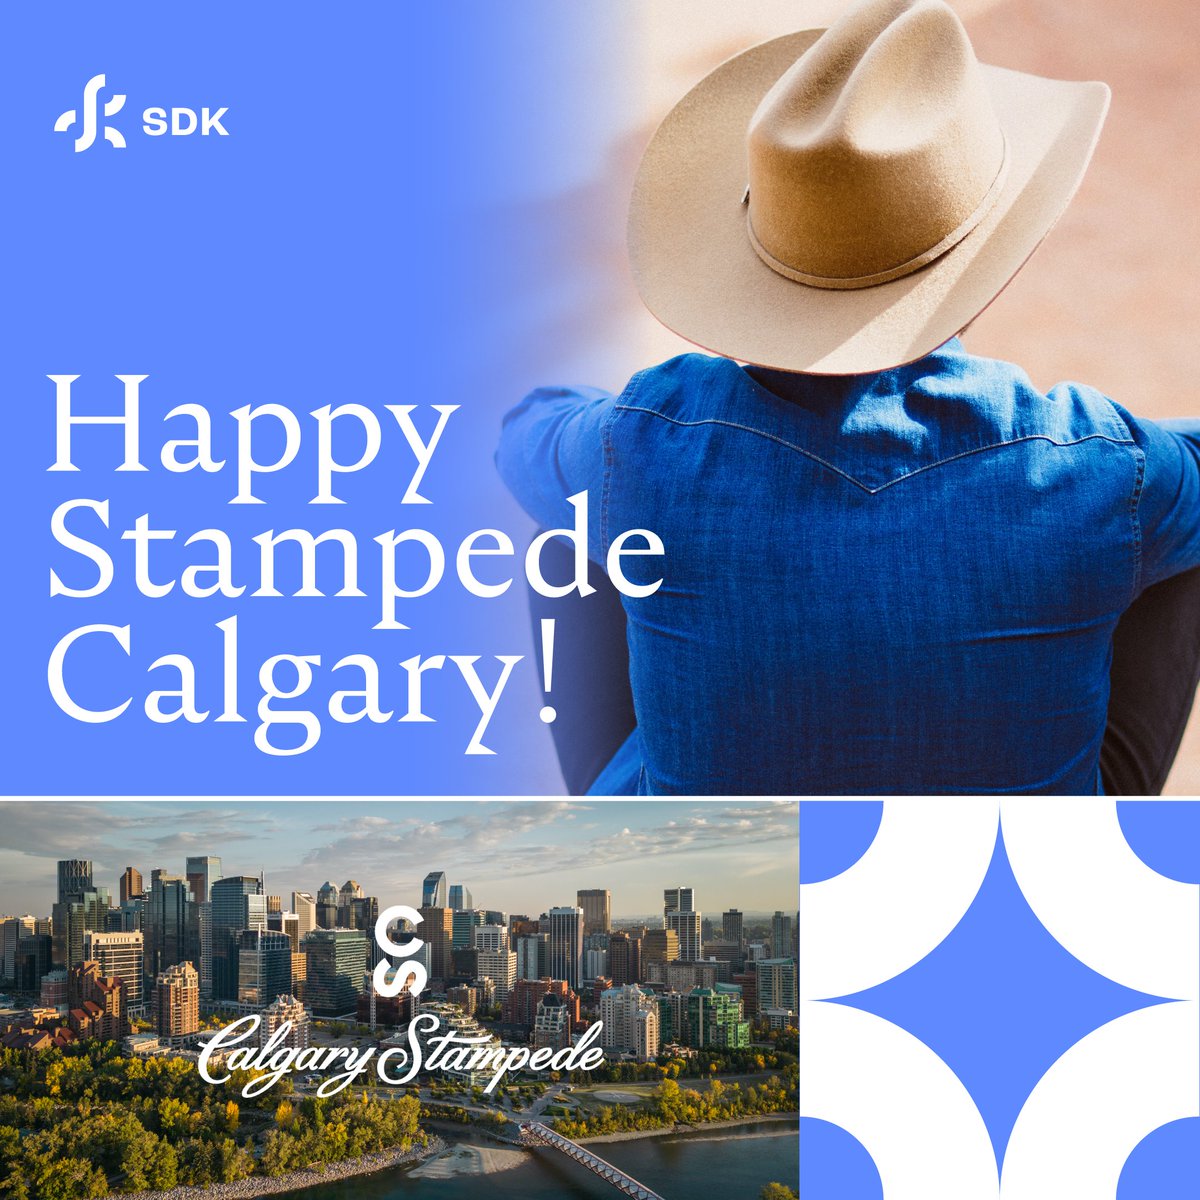 Stampeding into the first day of #Stampede2023! Celebrating from our #cowtown HQ, SDK is proud of our Western roots. Here's to a vibrant showcase of heritage & community, and the Greatest Outdoor Show on Earth! #calgarystampede #calgarystampede2023 #yyc